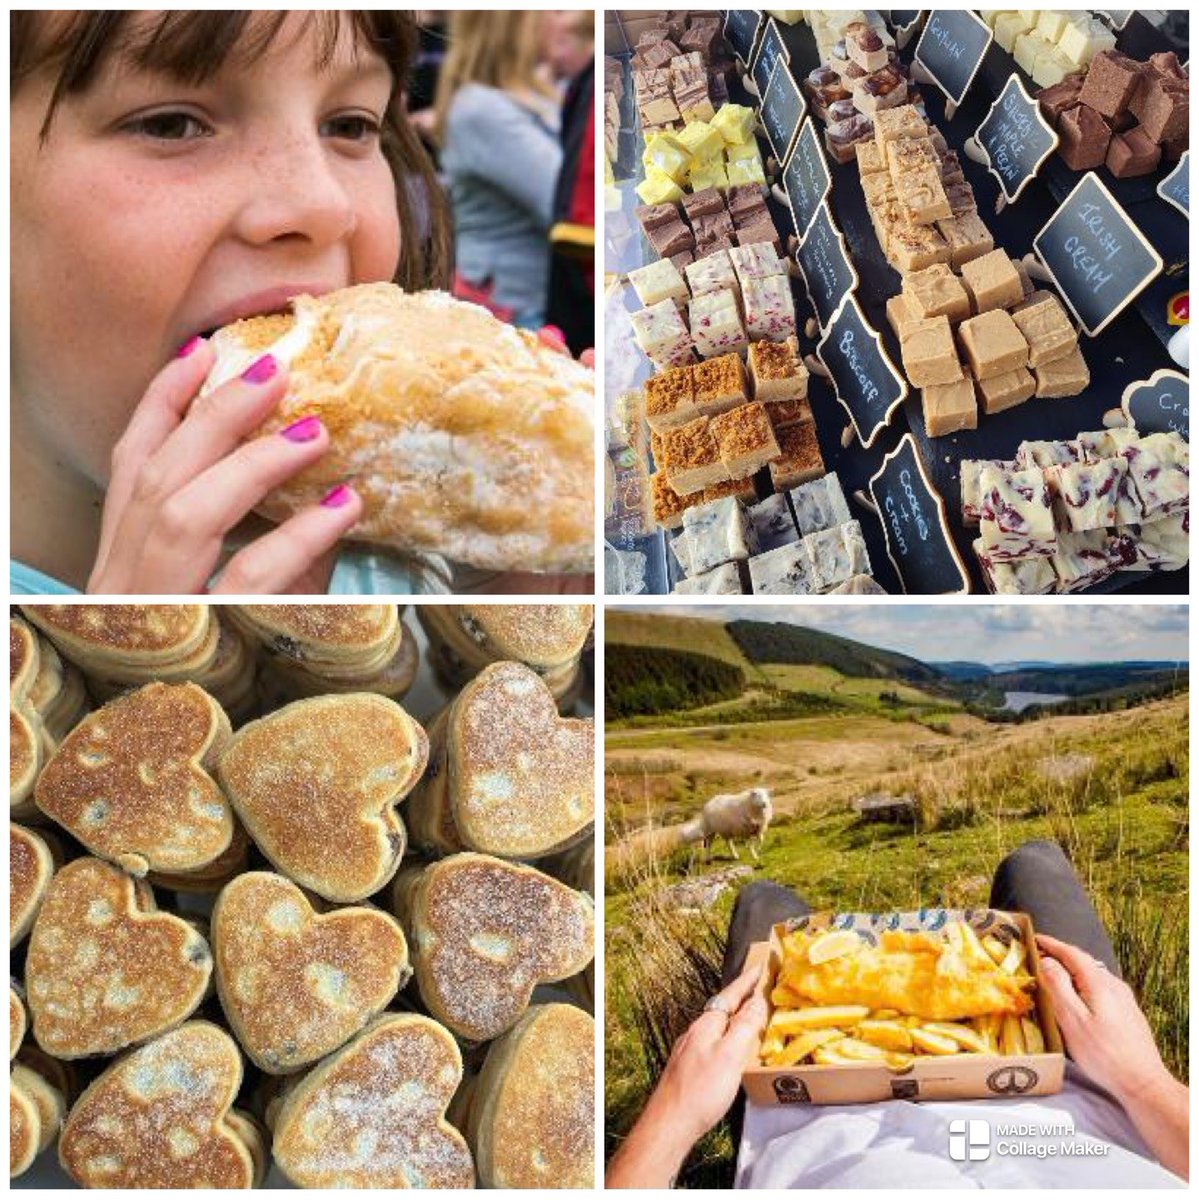 There’s fantastic food on the menu at Aberdare Festival on 25th May. From gourmet doughnuts to award winning fish and chips, there’s something for everyone. Take a look here 👉 orlo.uk/WGcvV